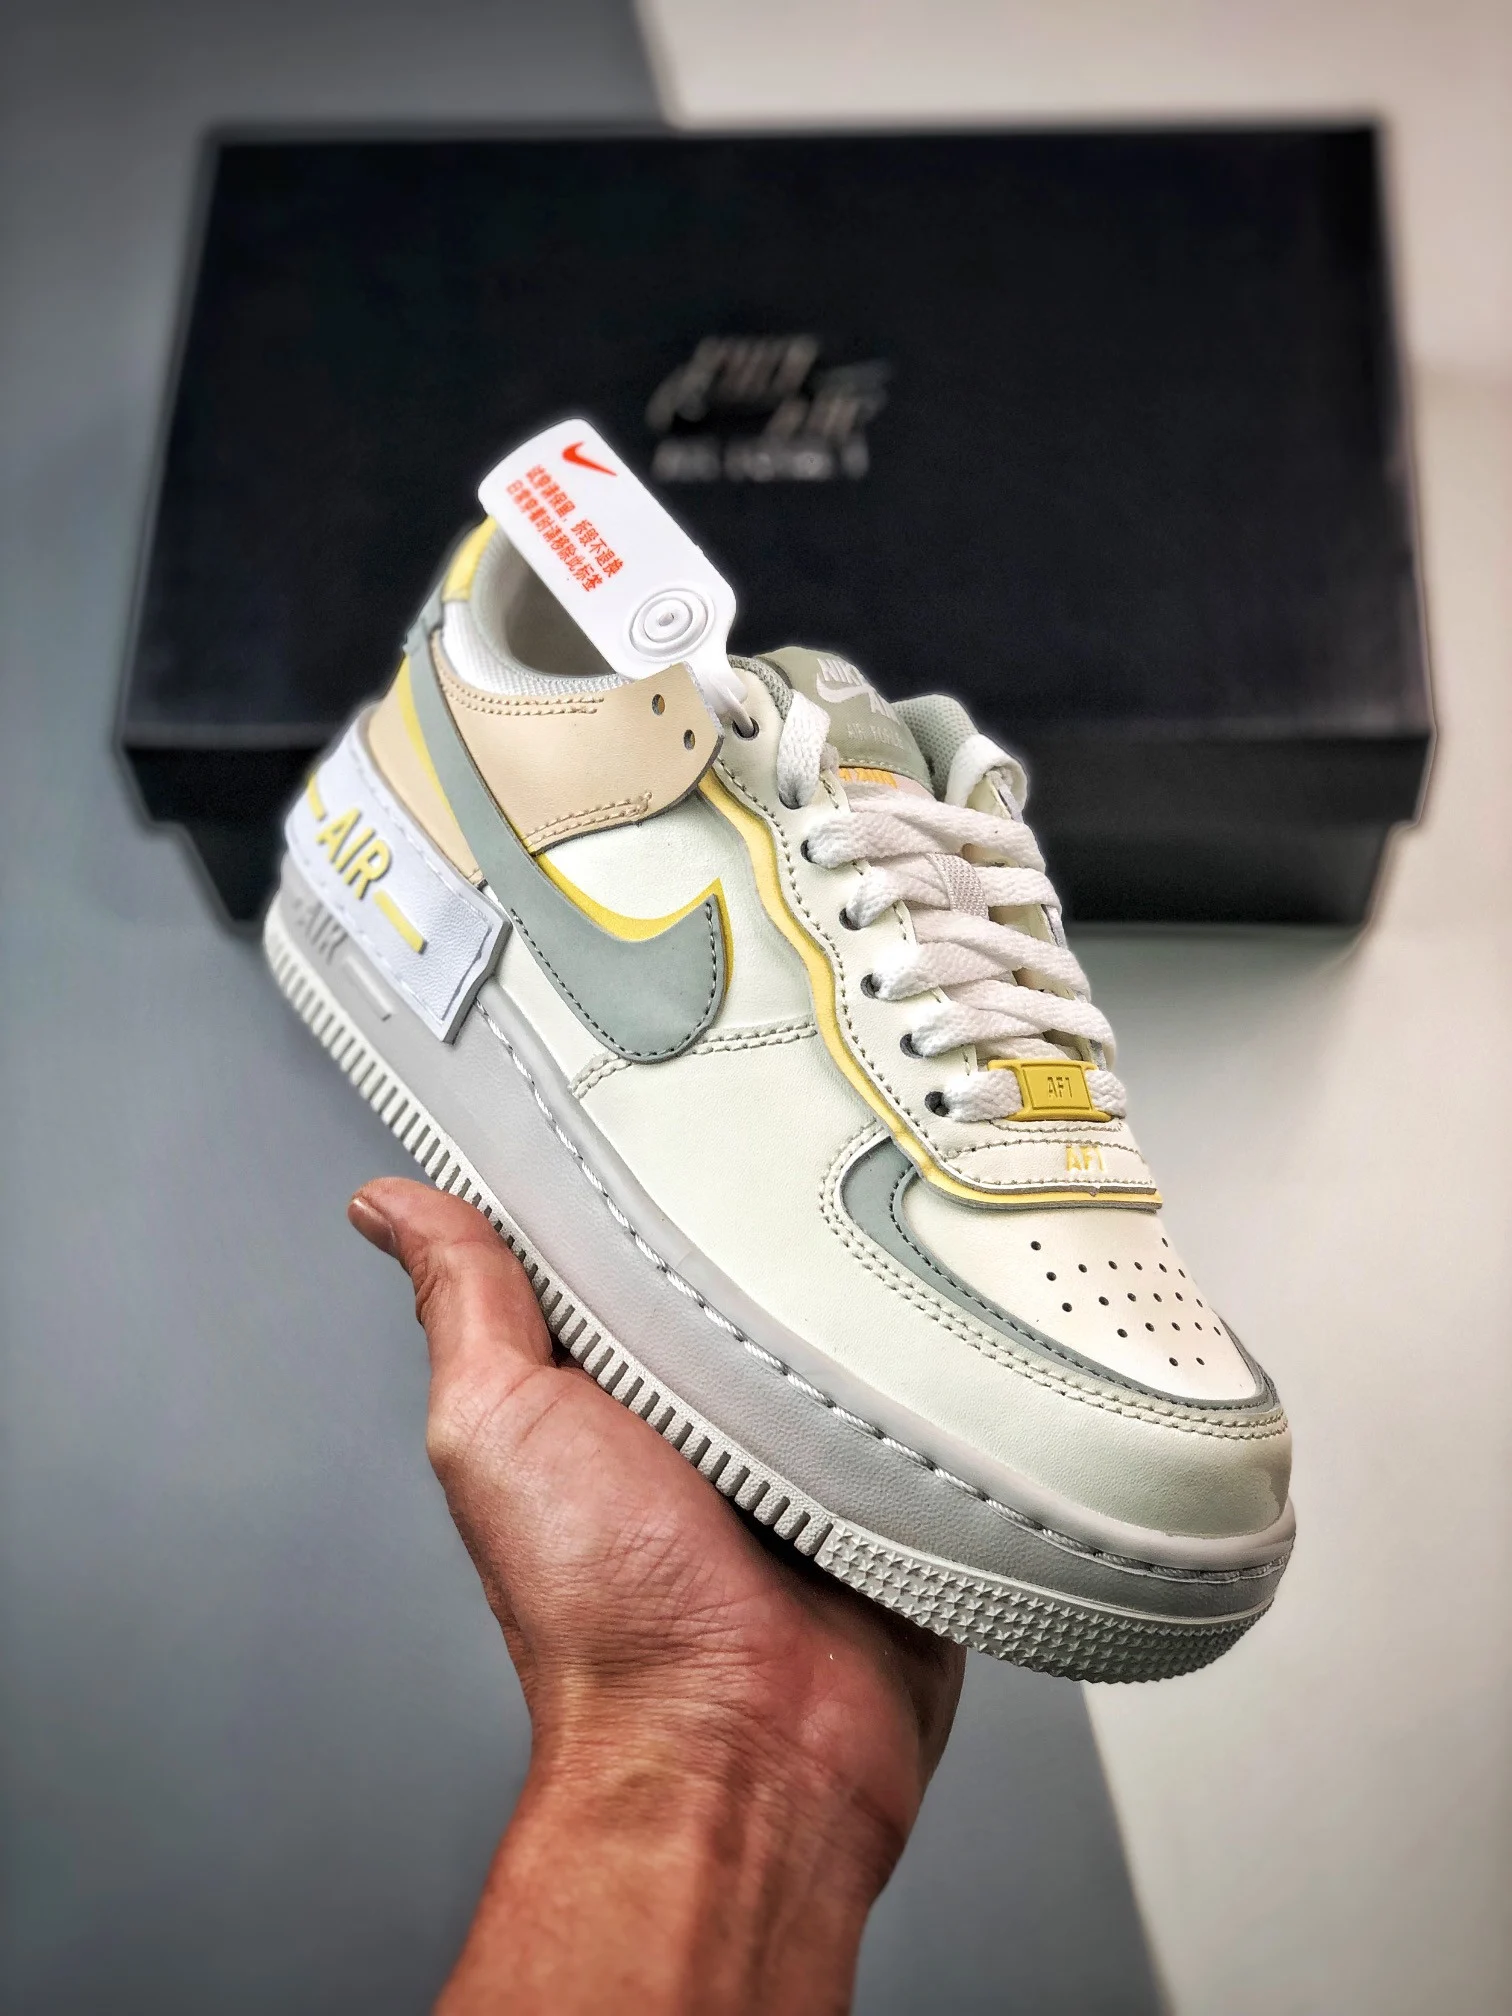 Nike Air Force 1 Shadow Sail Light Silver-Citron Tint DR7883-101 For Sale